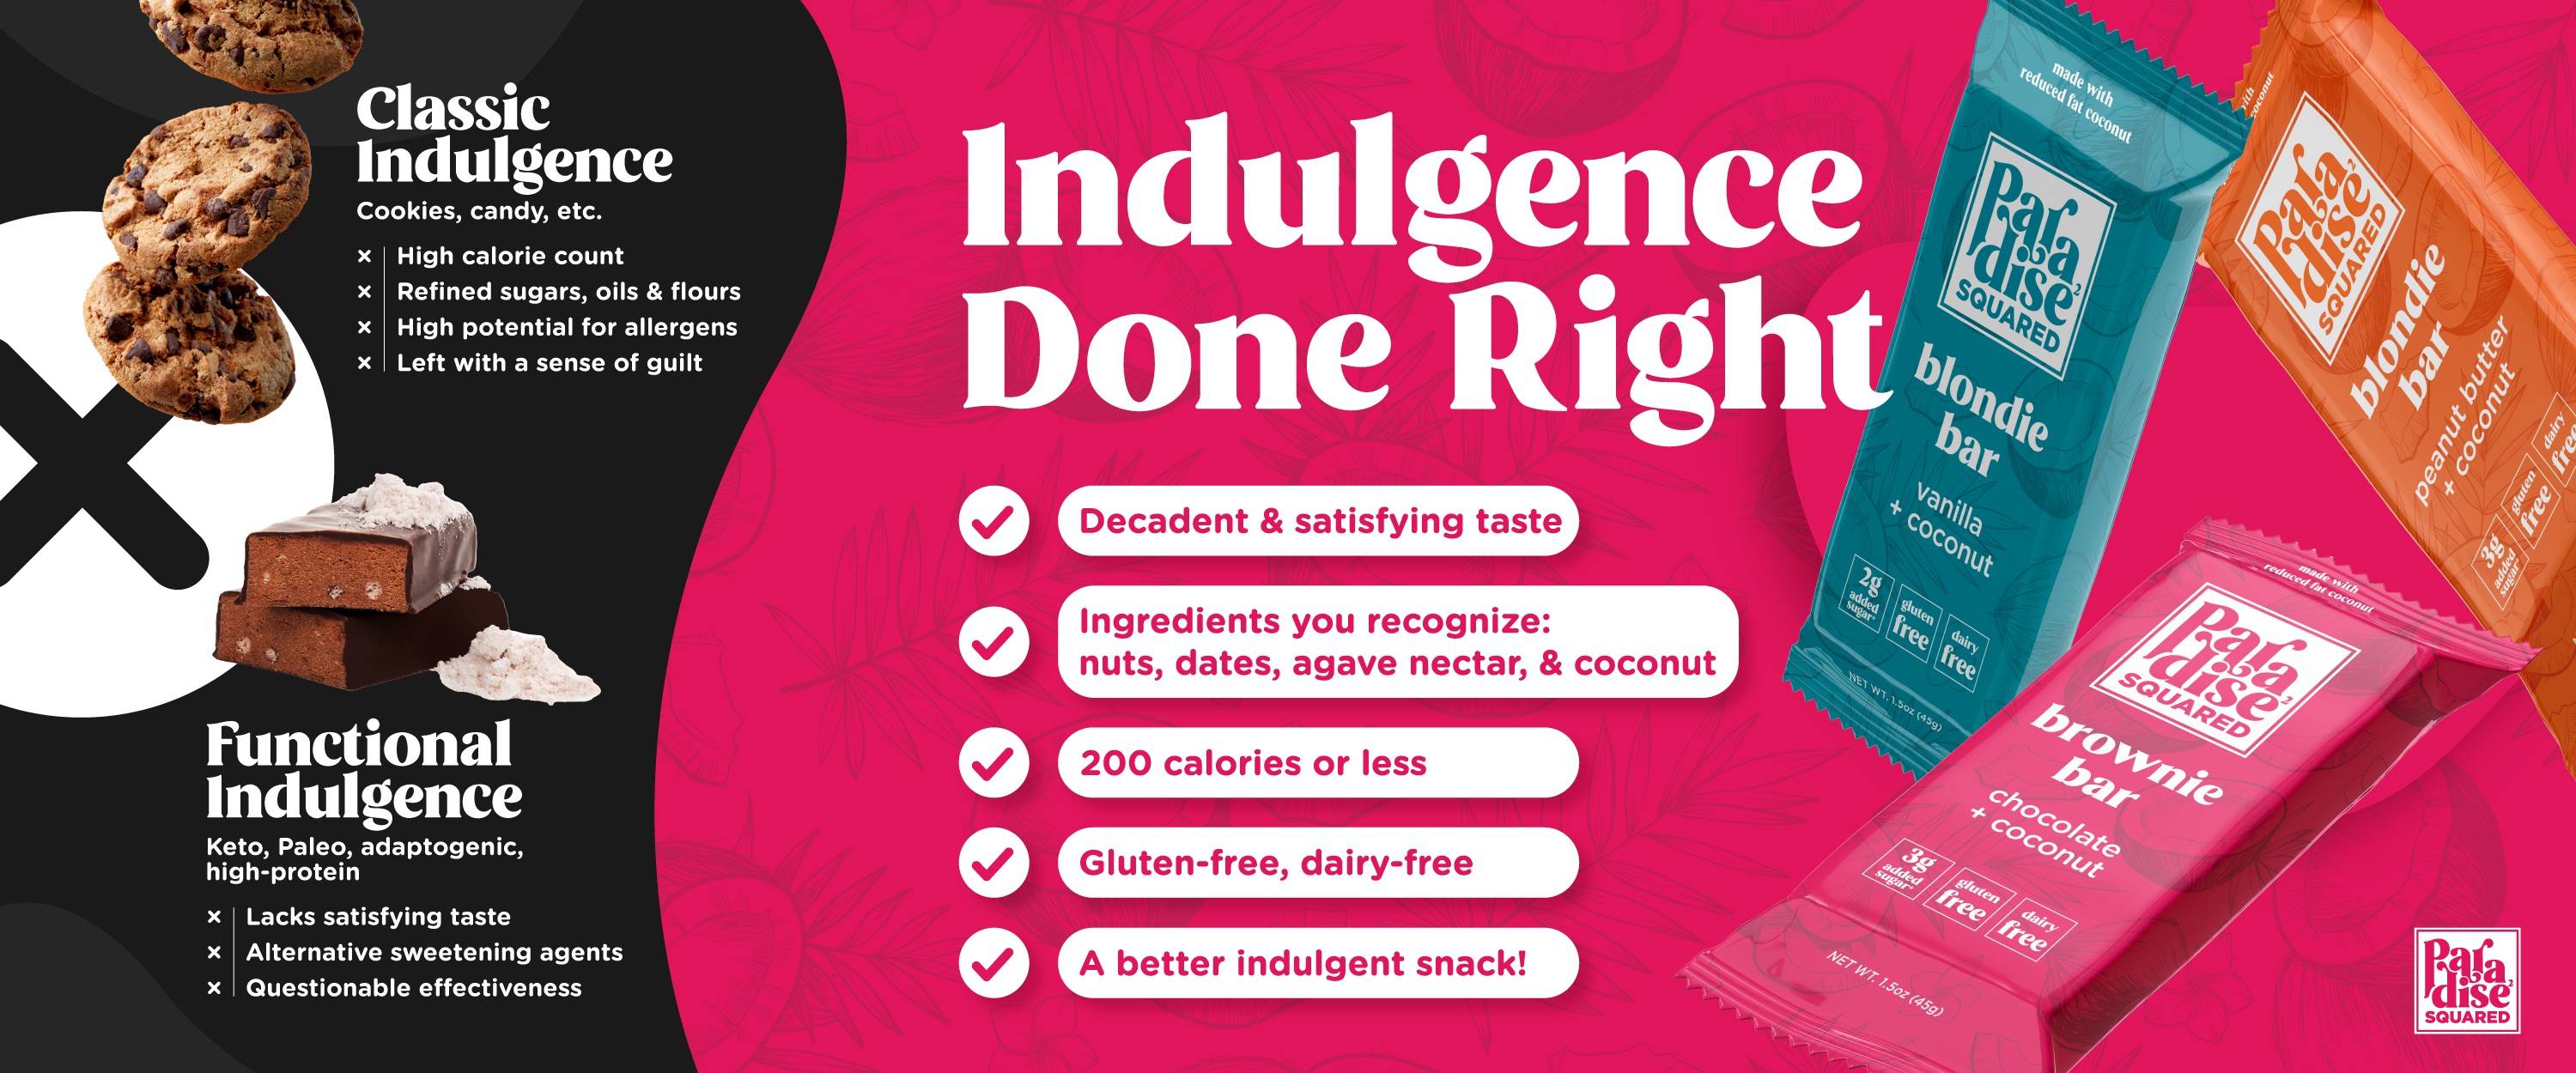 Classic indulgence is bad like cookies and candy they have a high calorie count refined sugars oils and flours as well as high potential for allergens and leave you with a sense of guilt. Functional Indulgence products like keto, paleo, adaptogenic, high-protein products lack a satisfying taste have poor tasting sweetening agents and have questionable effectiveness. Paradise Squared is indulgence done right. decadent and satisfying, ingredients you recognize like nuts, dates, agave nectar, and coconut. Just 200 calories or less, gluten-free, dairy-free its a better indulgent snack!